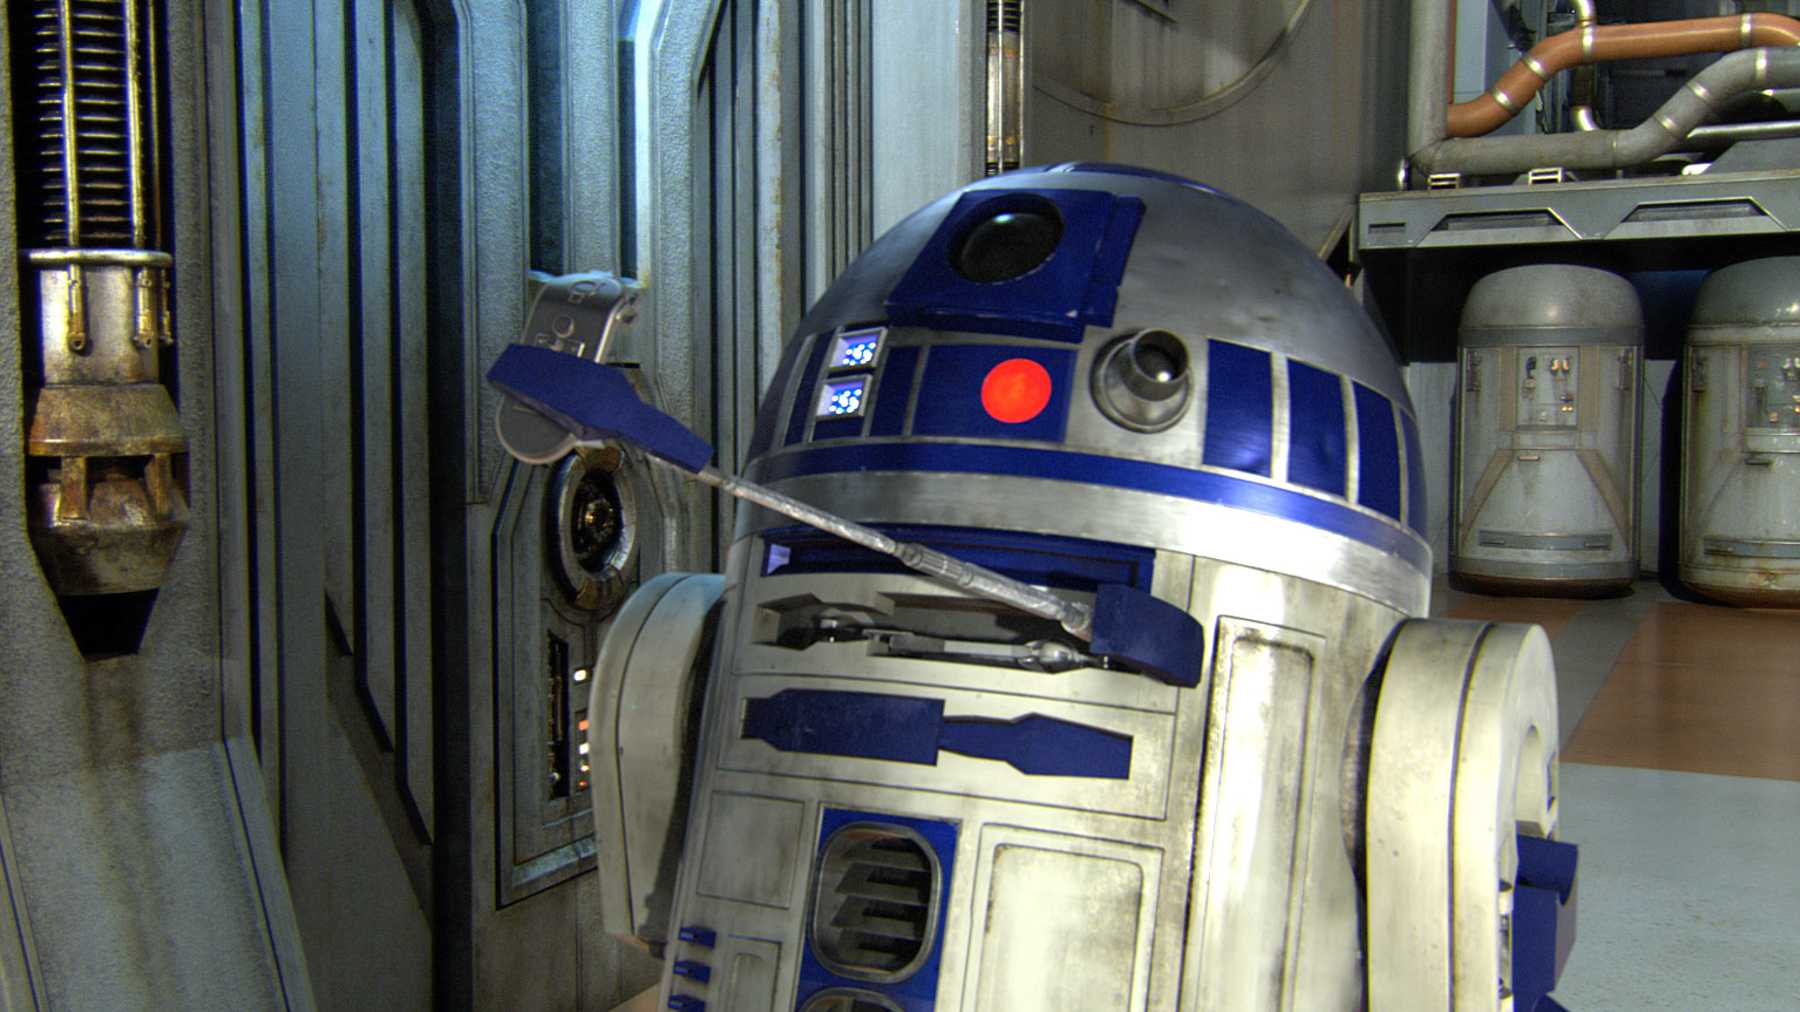 Do You Know a Little Bit About Everything: “Star Wars” Edition Star Wars R2 D2